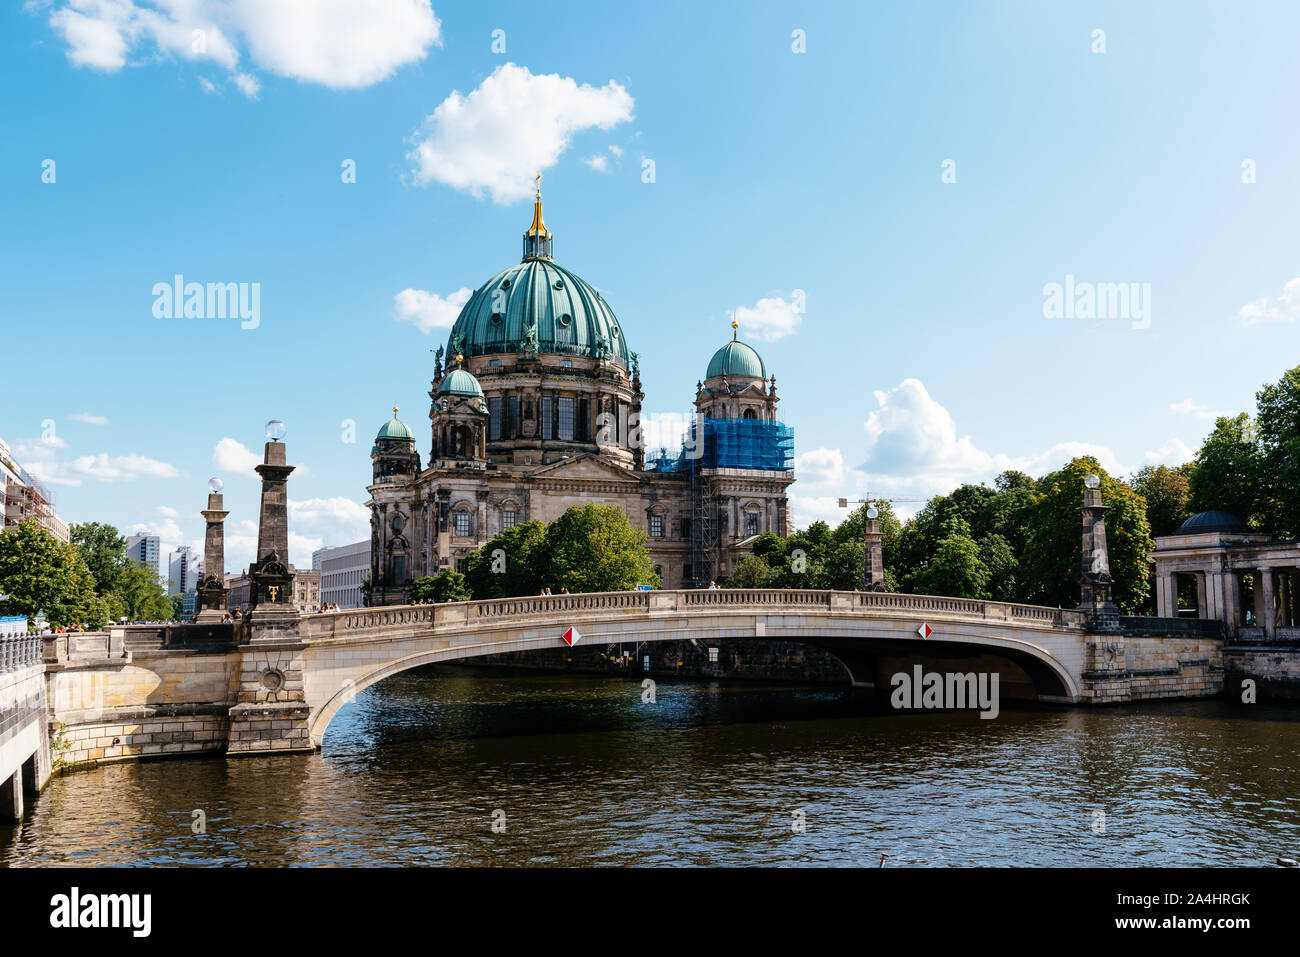 Berlin, Germany - July 27, 2019: Scenic view of Spree river, Friedrichs Bridge and Berlin Cathedral or Berliner Dom in Museum Island Stock Photo